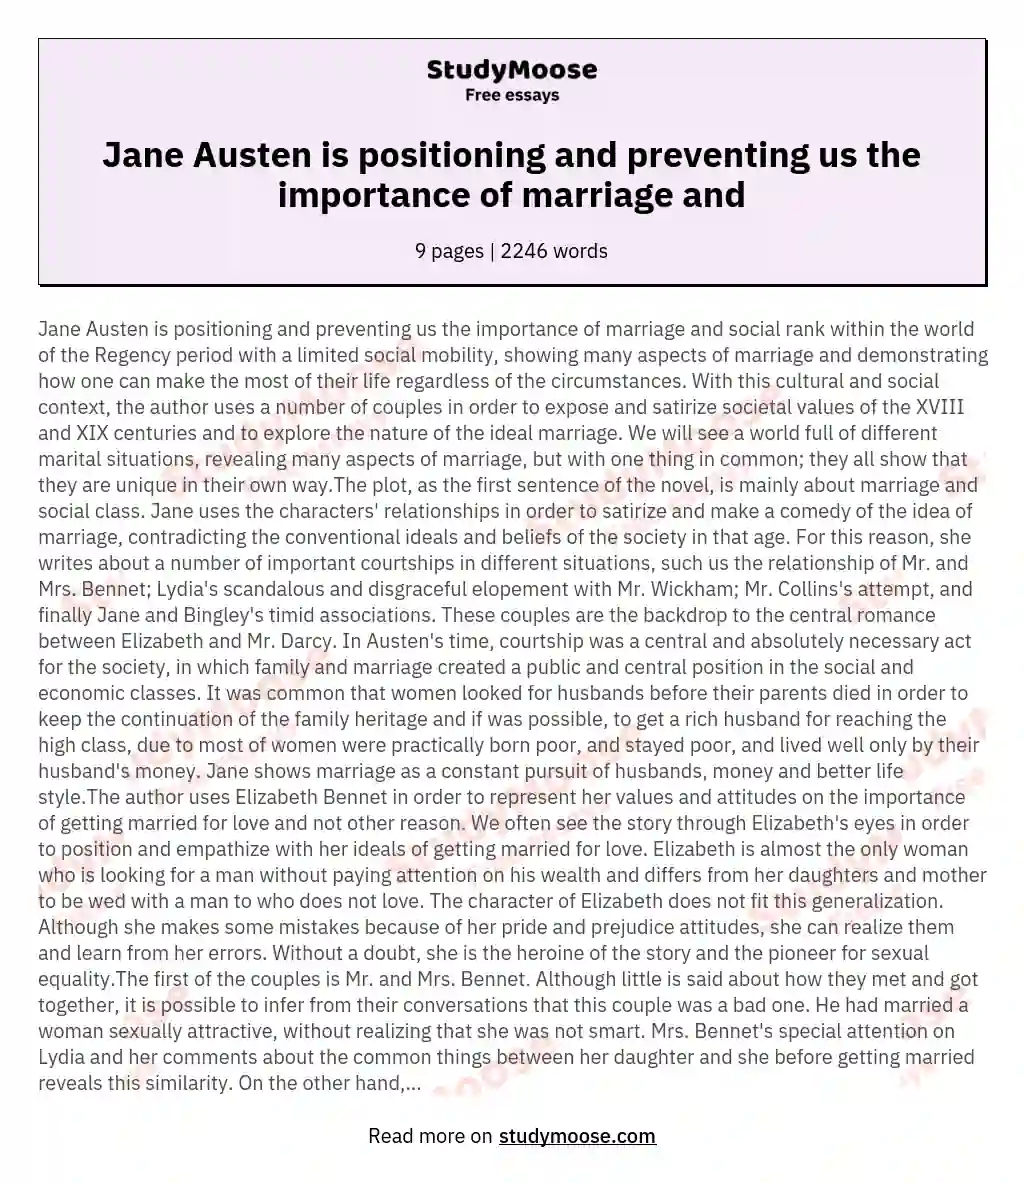 Jane Austen is positioning and preventing us the importance of marriage and essay